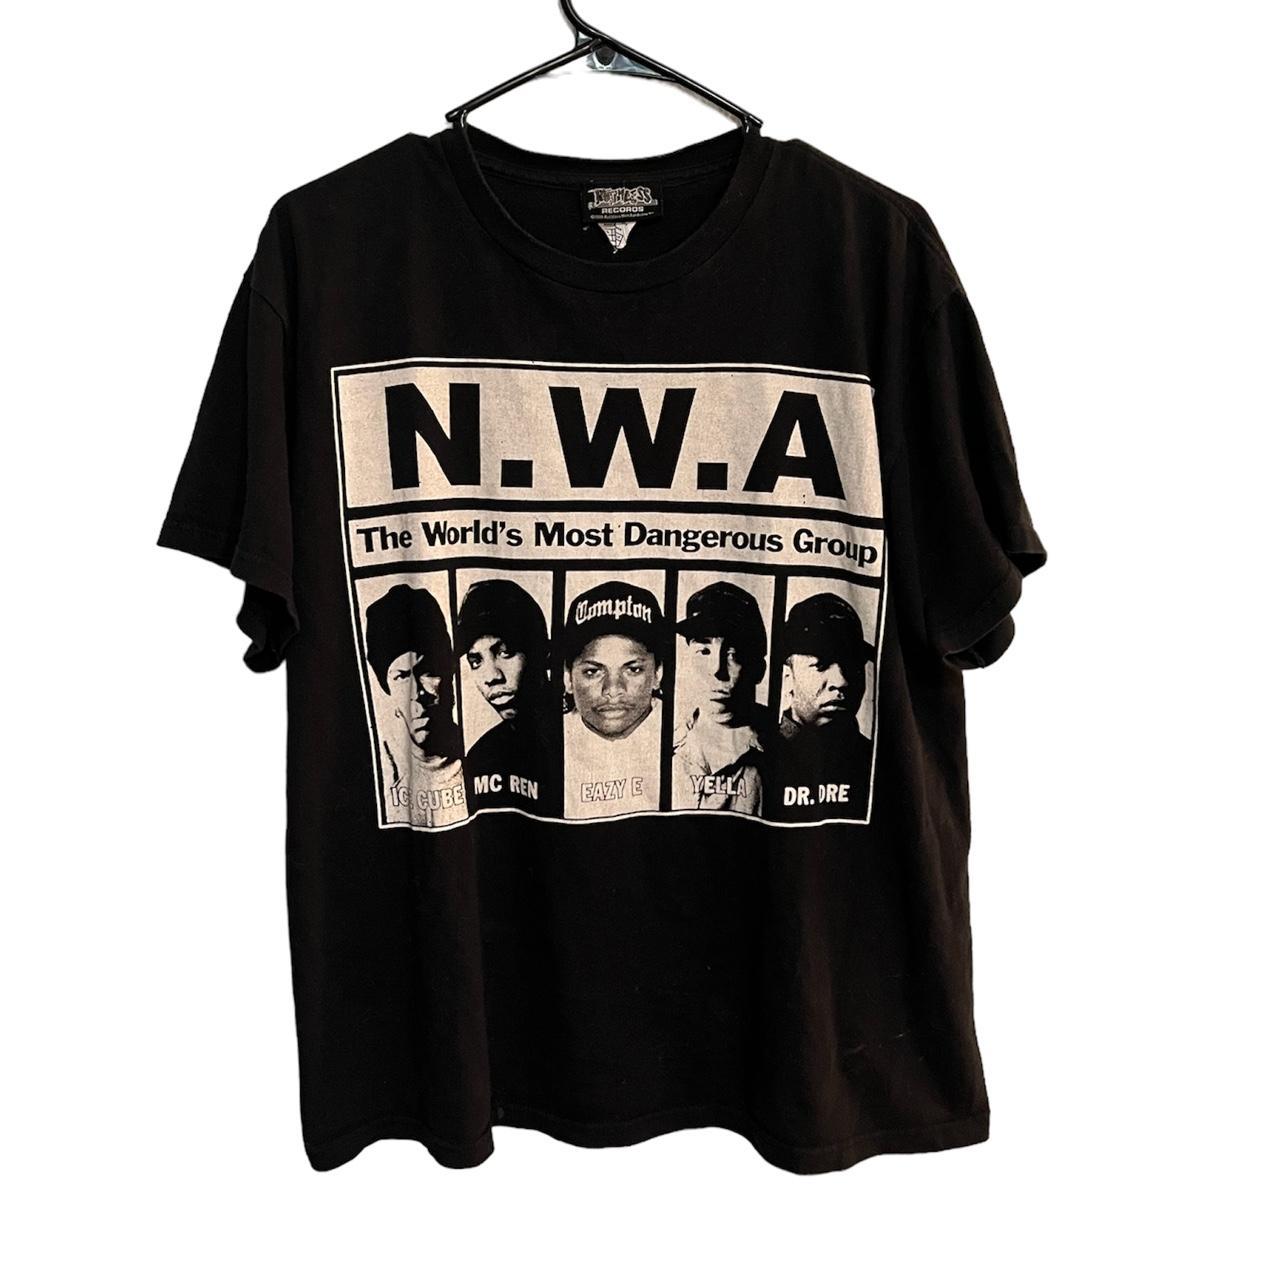 NWA Ruthless Records 2006 T Shirt, Size M , Excellent...